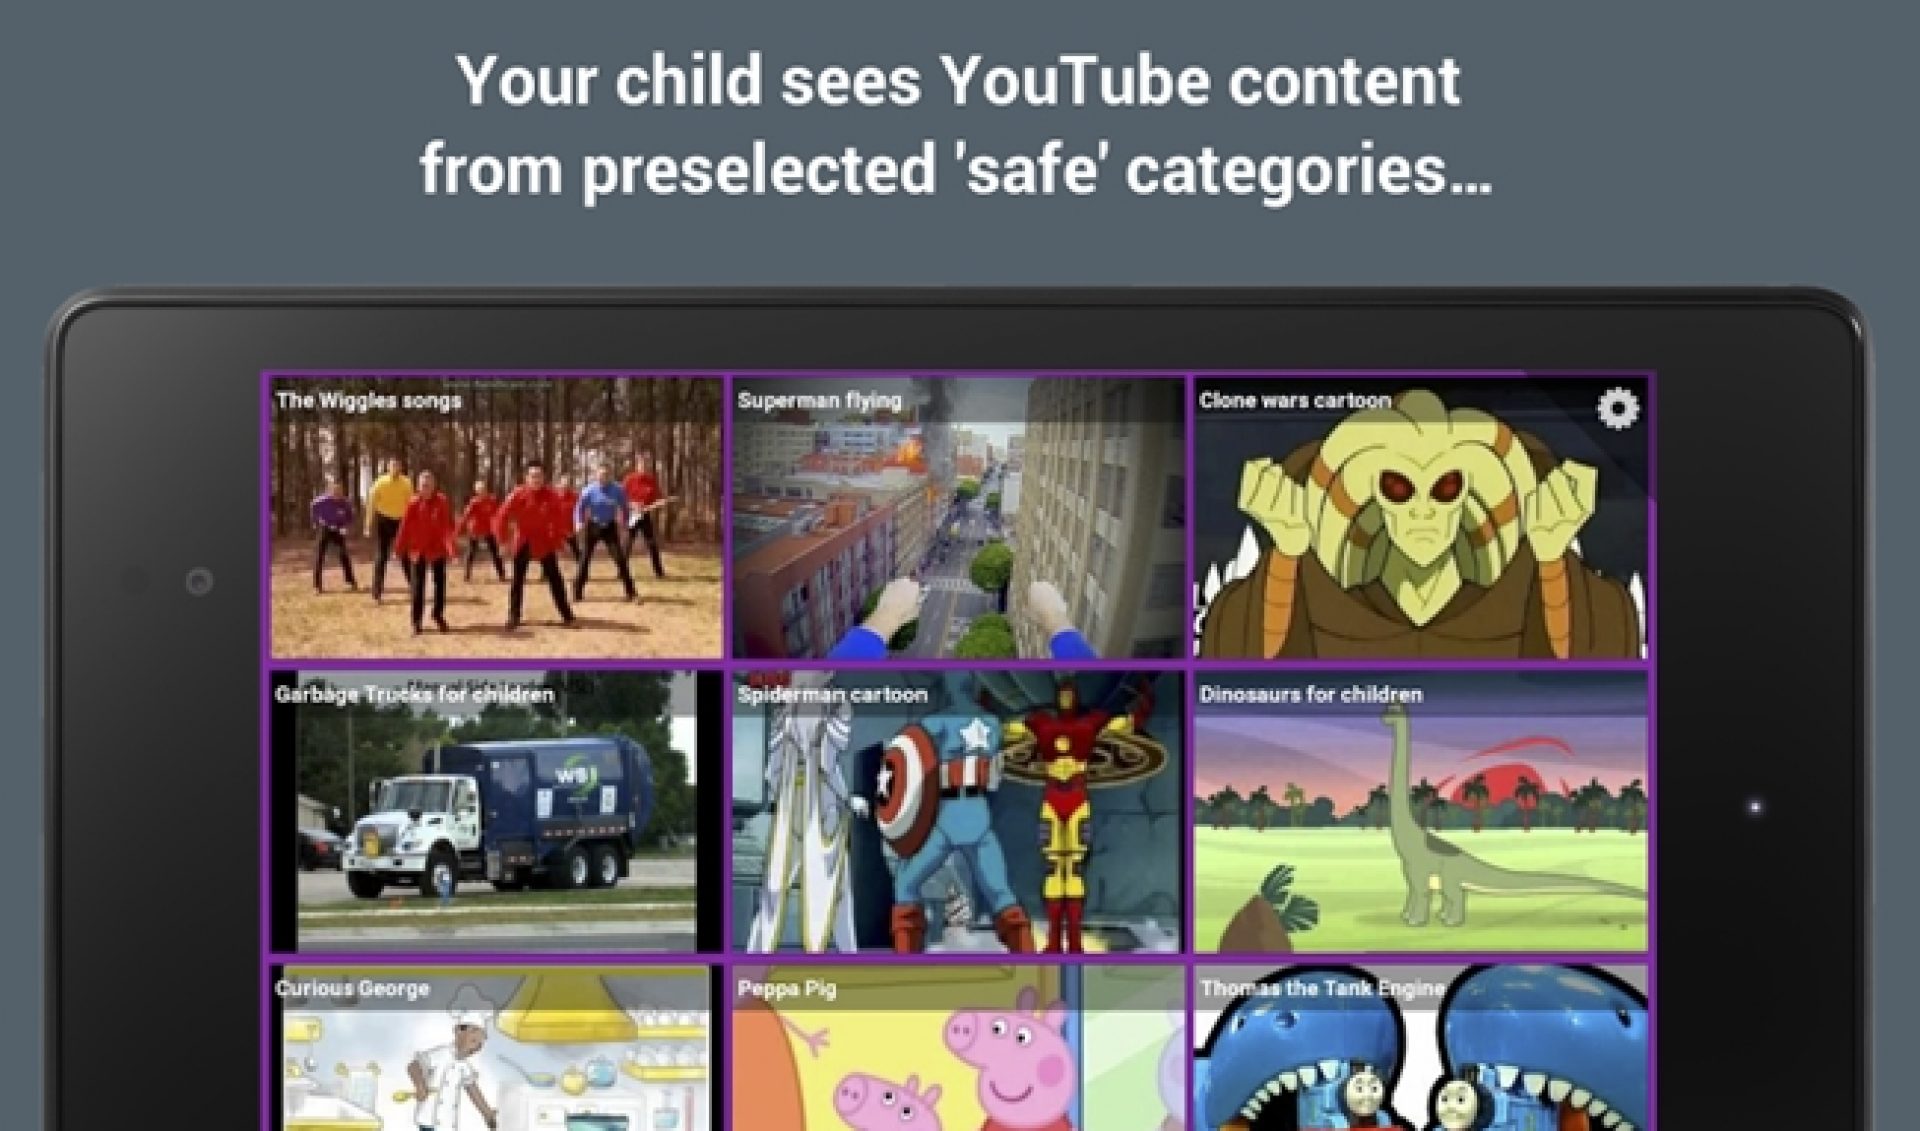 HomeTube Picks Out YouTube Videos That Are Good For Kids